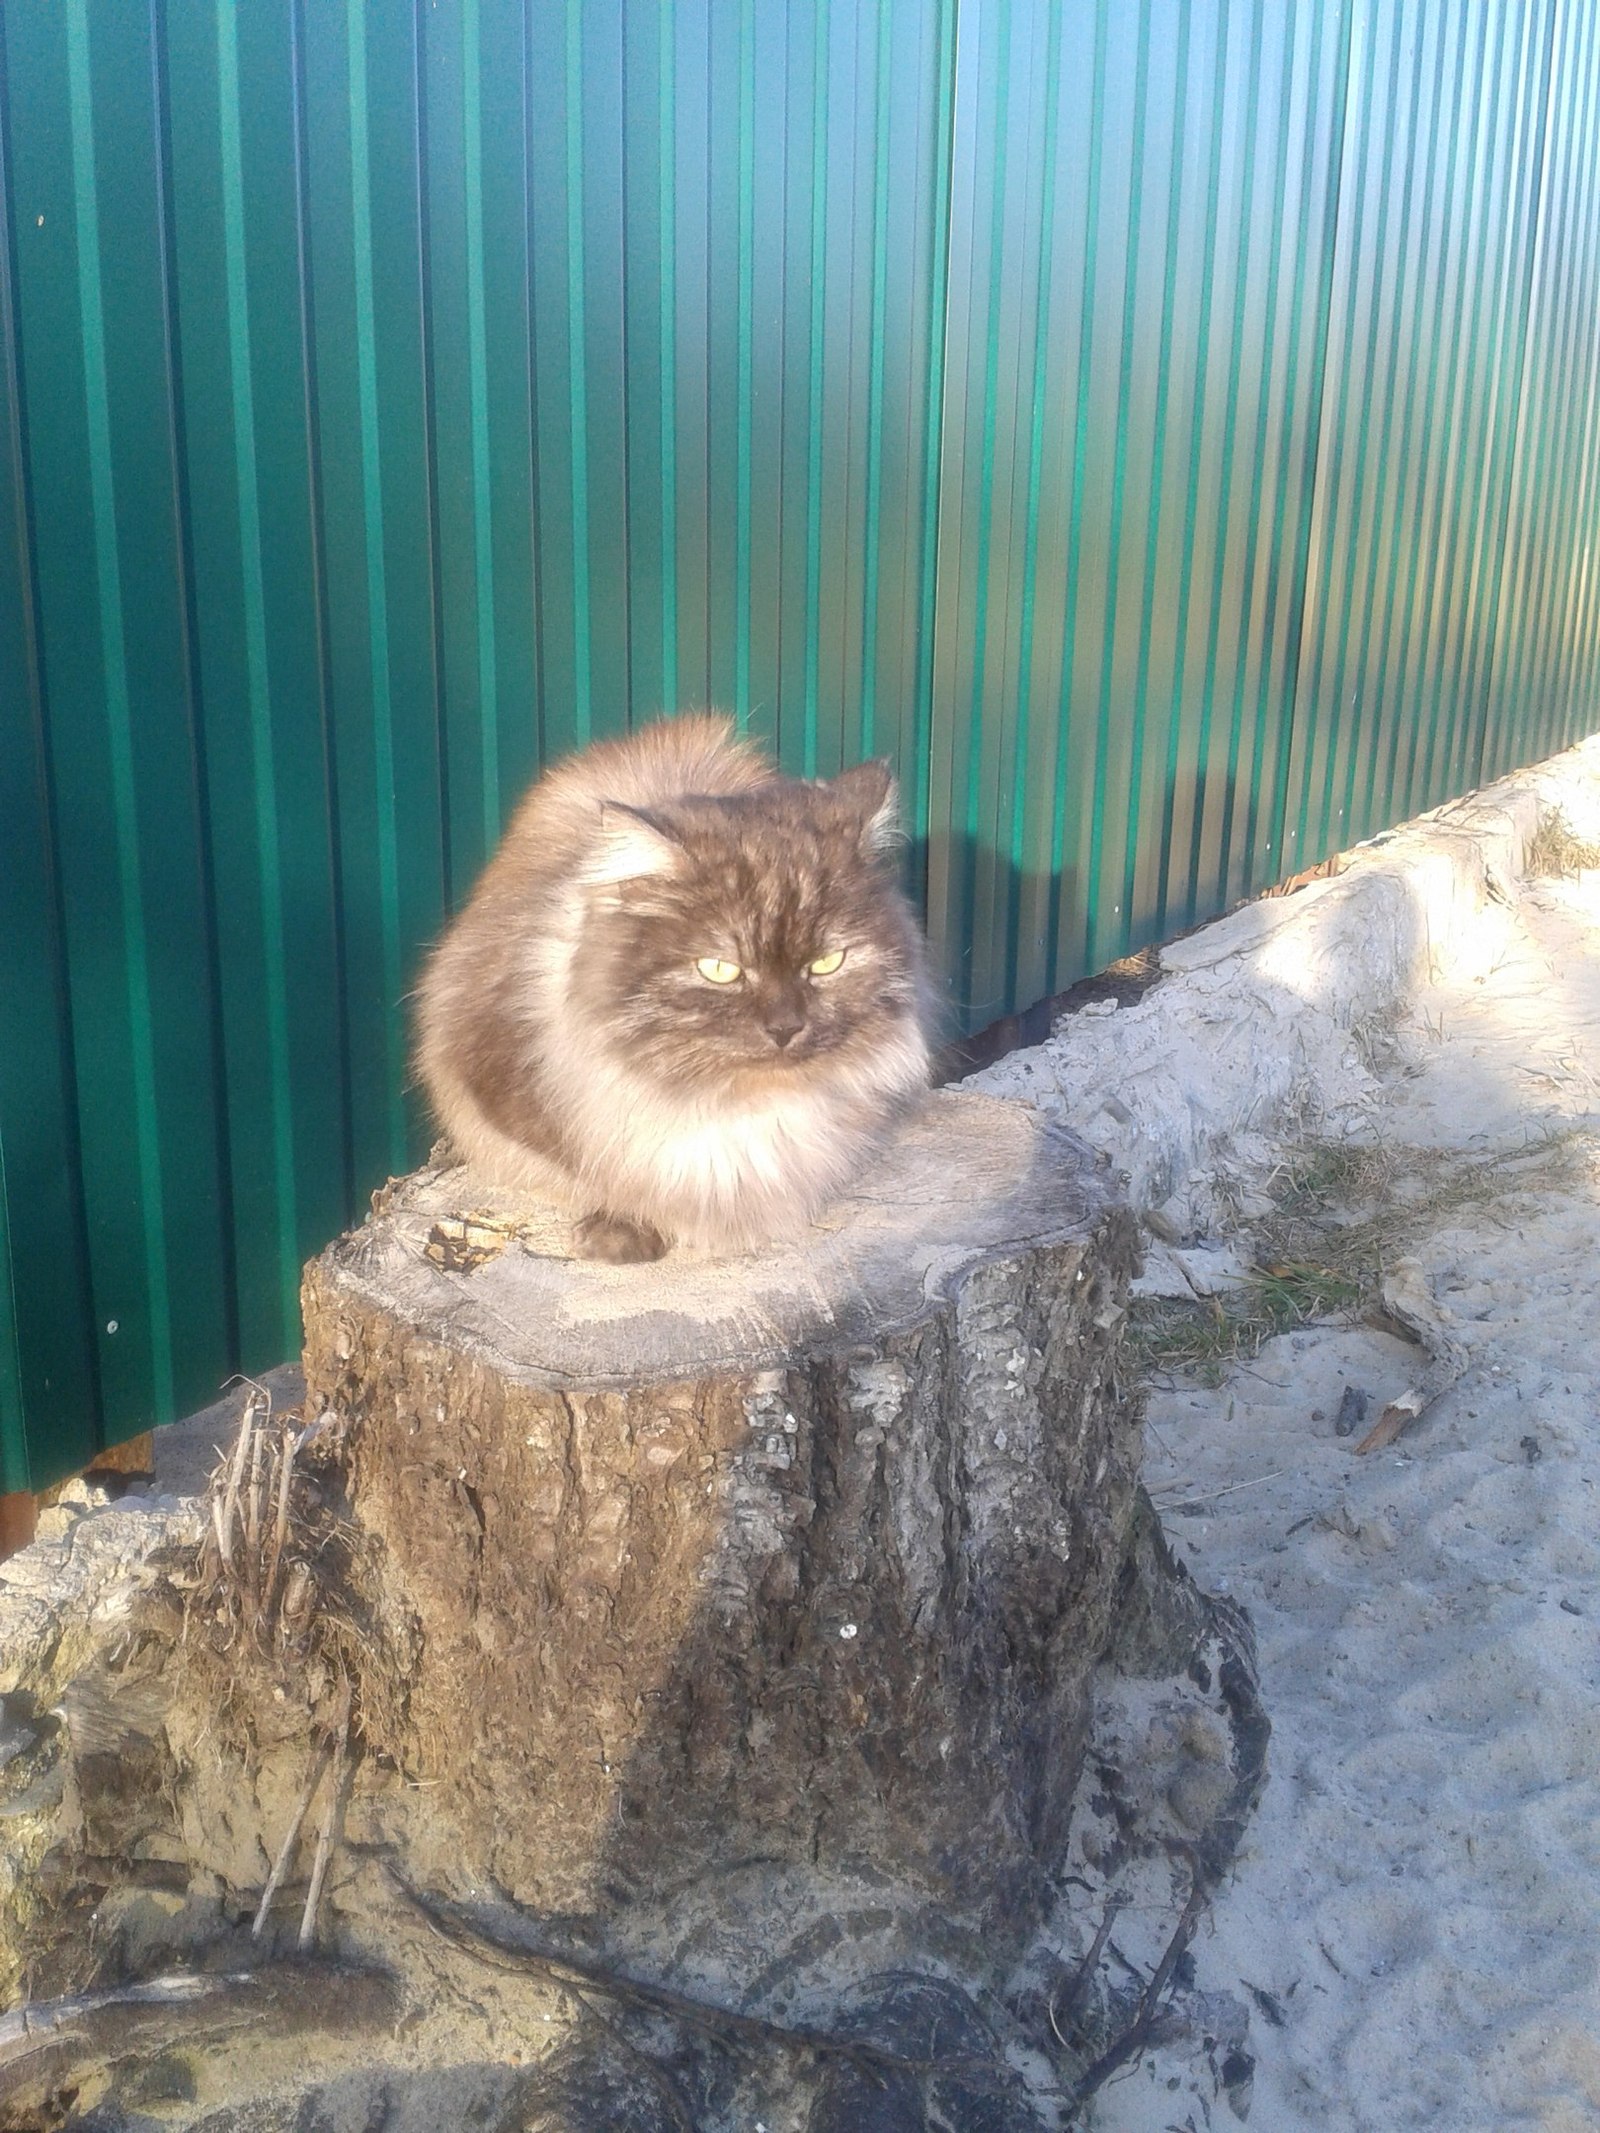 Sat on a whiskas stump - Stump, cat, Duty, How to live further?, The photo, Sand, Spring, The street, How to live